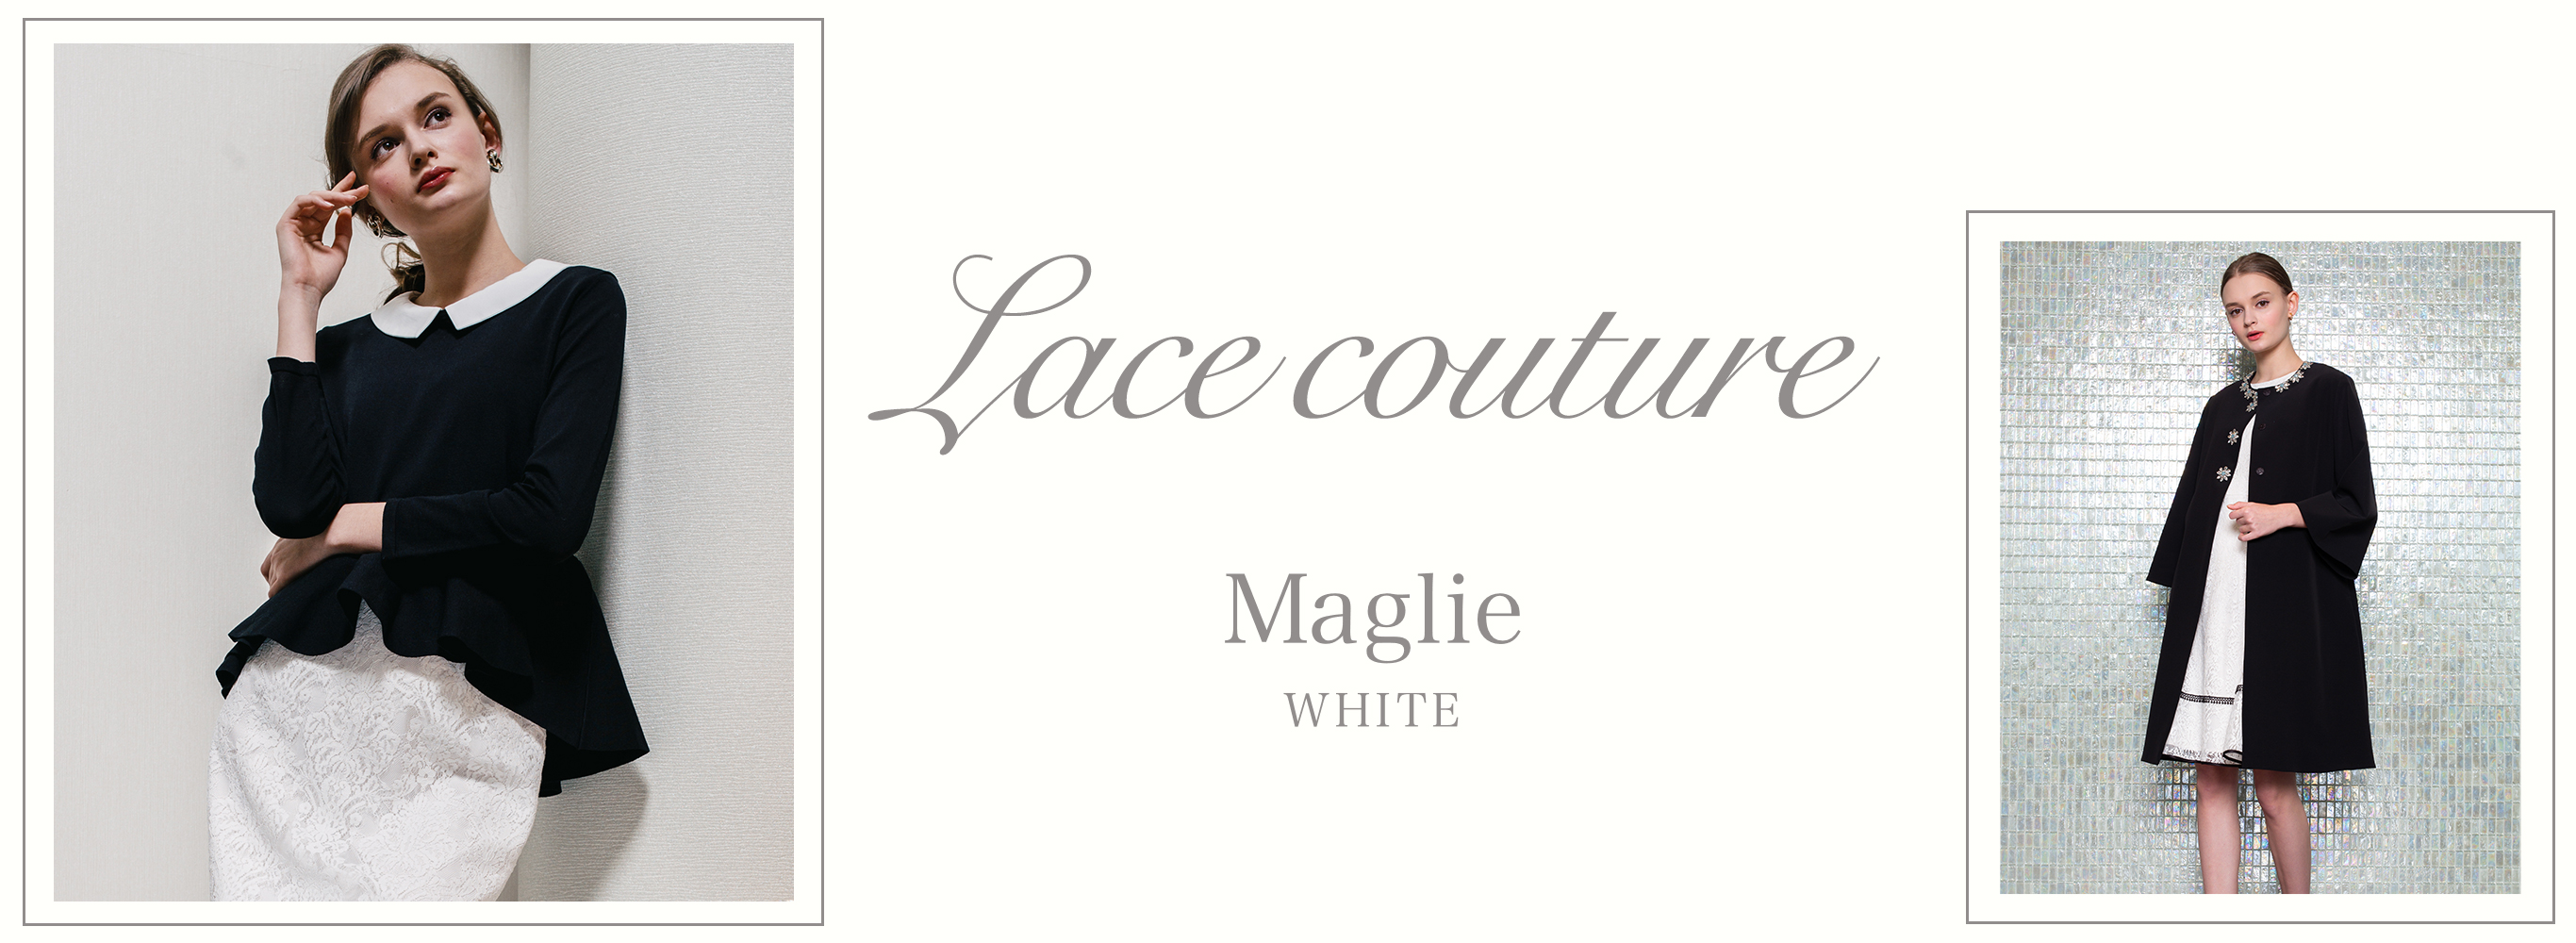 Lace couture